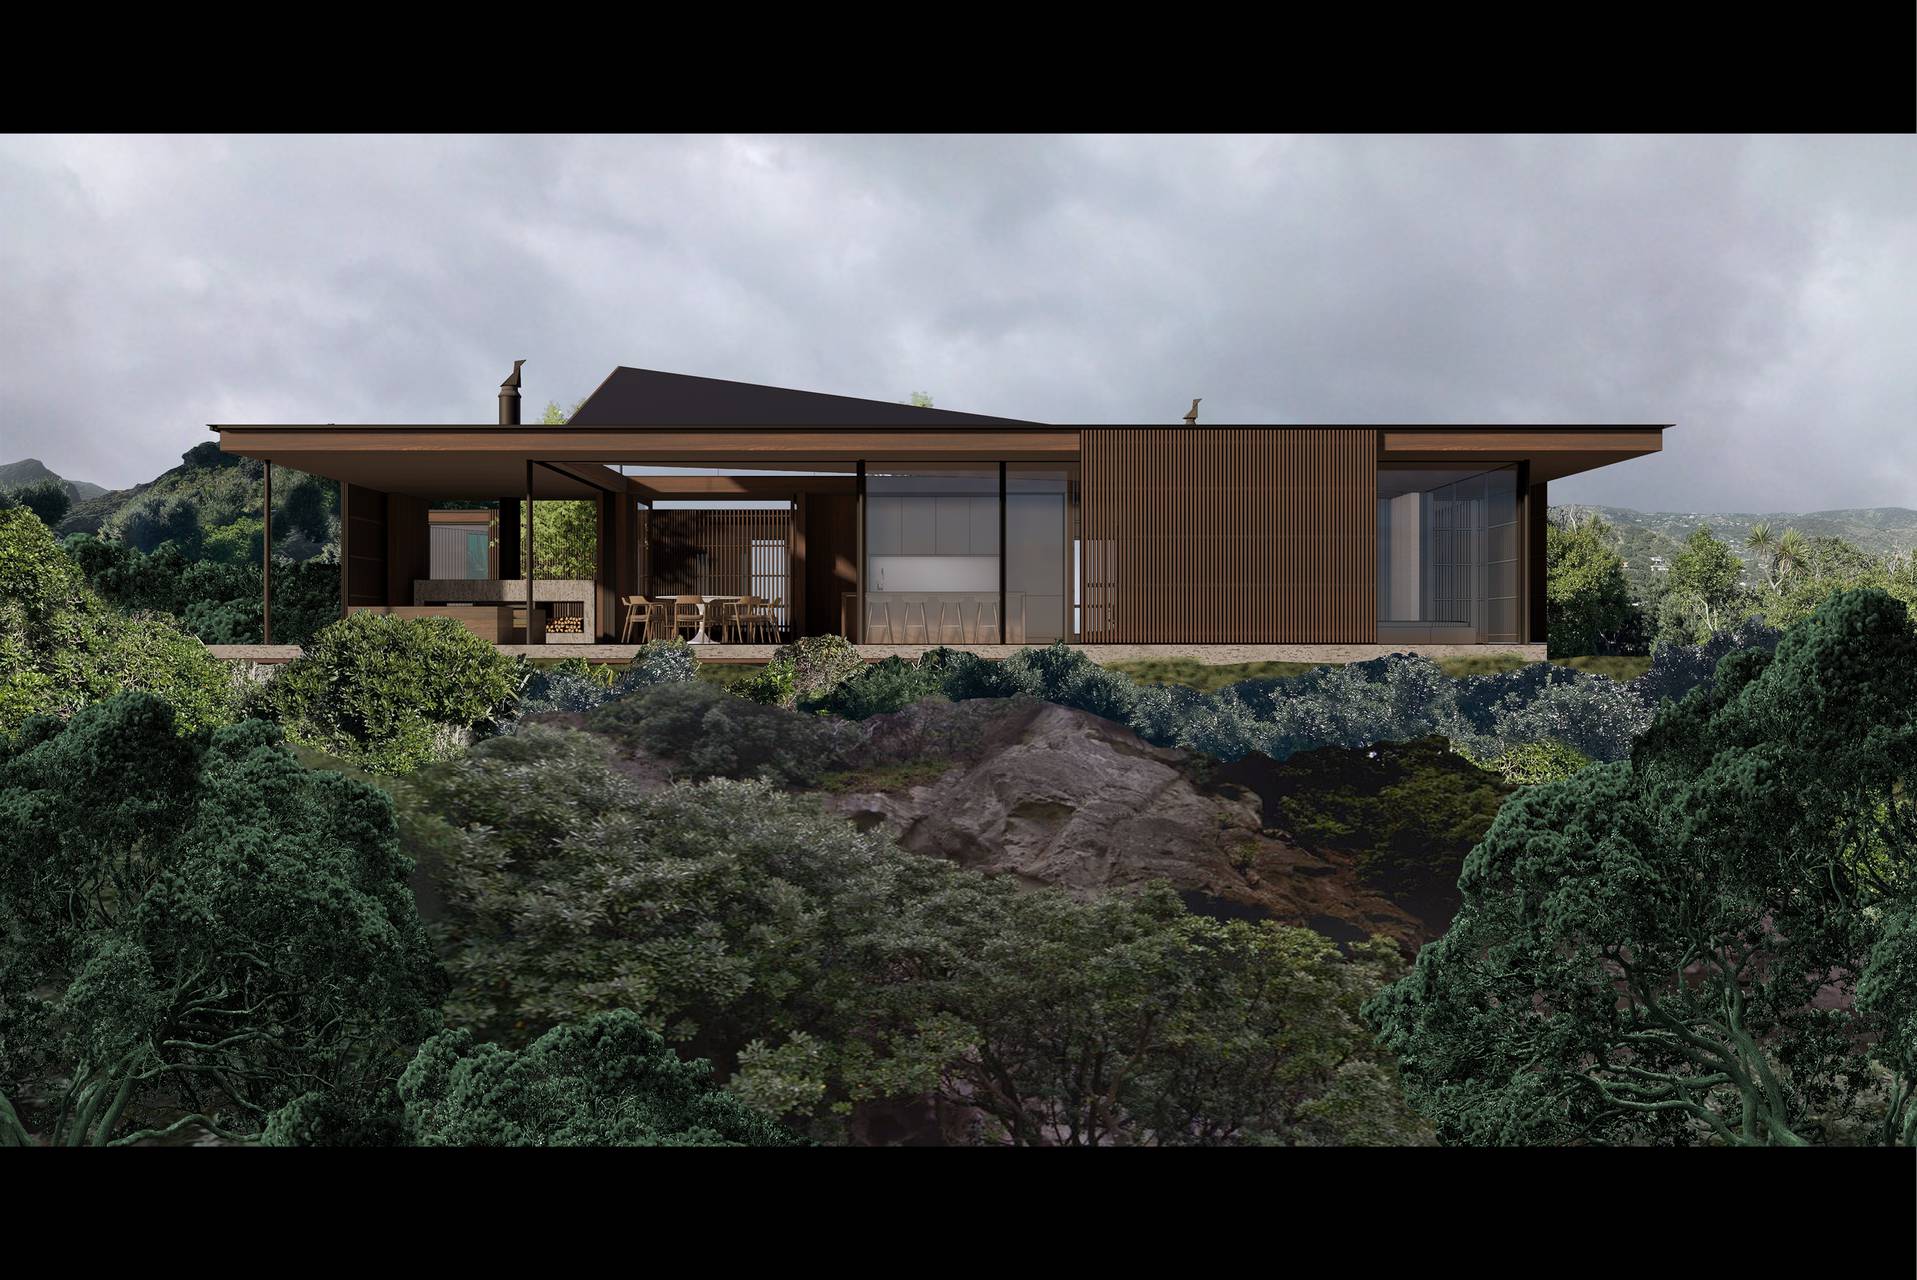 Piha on Parade by Herbst Architects